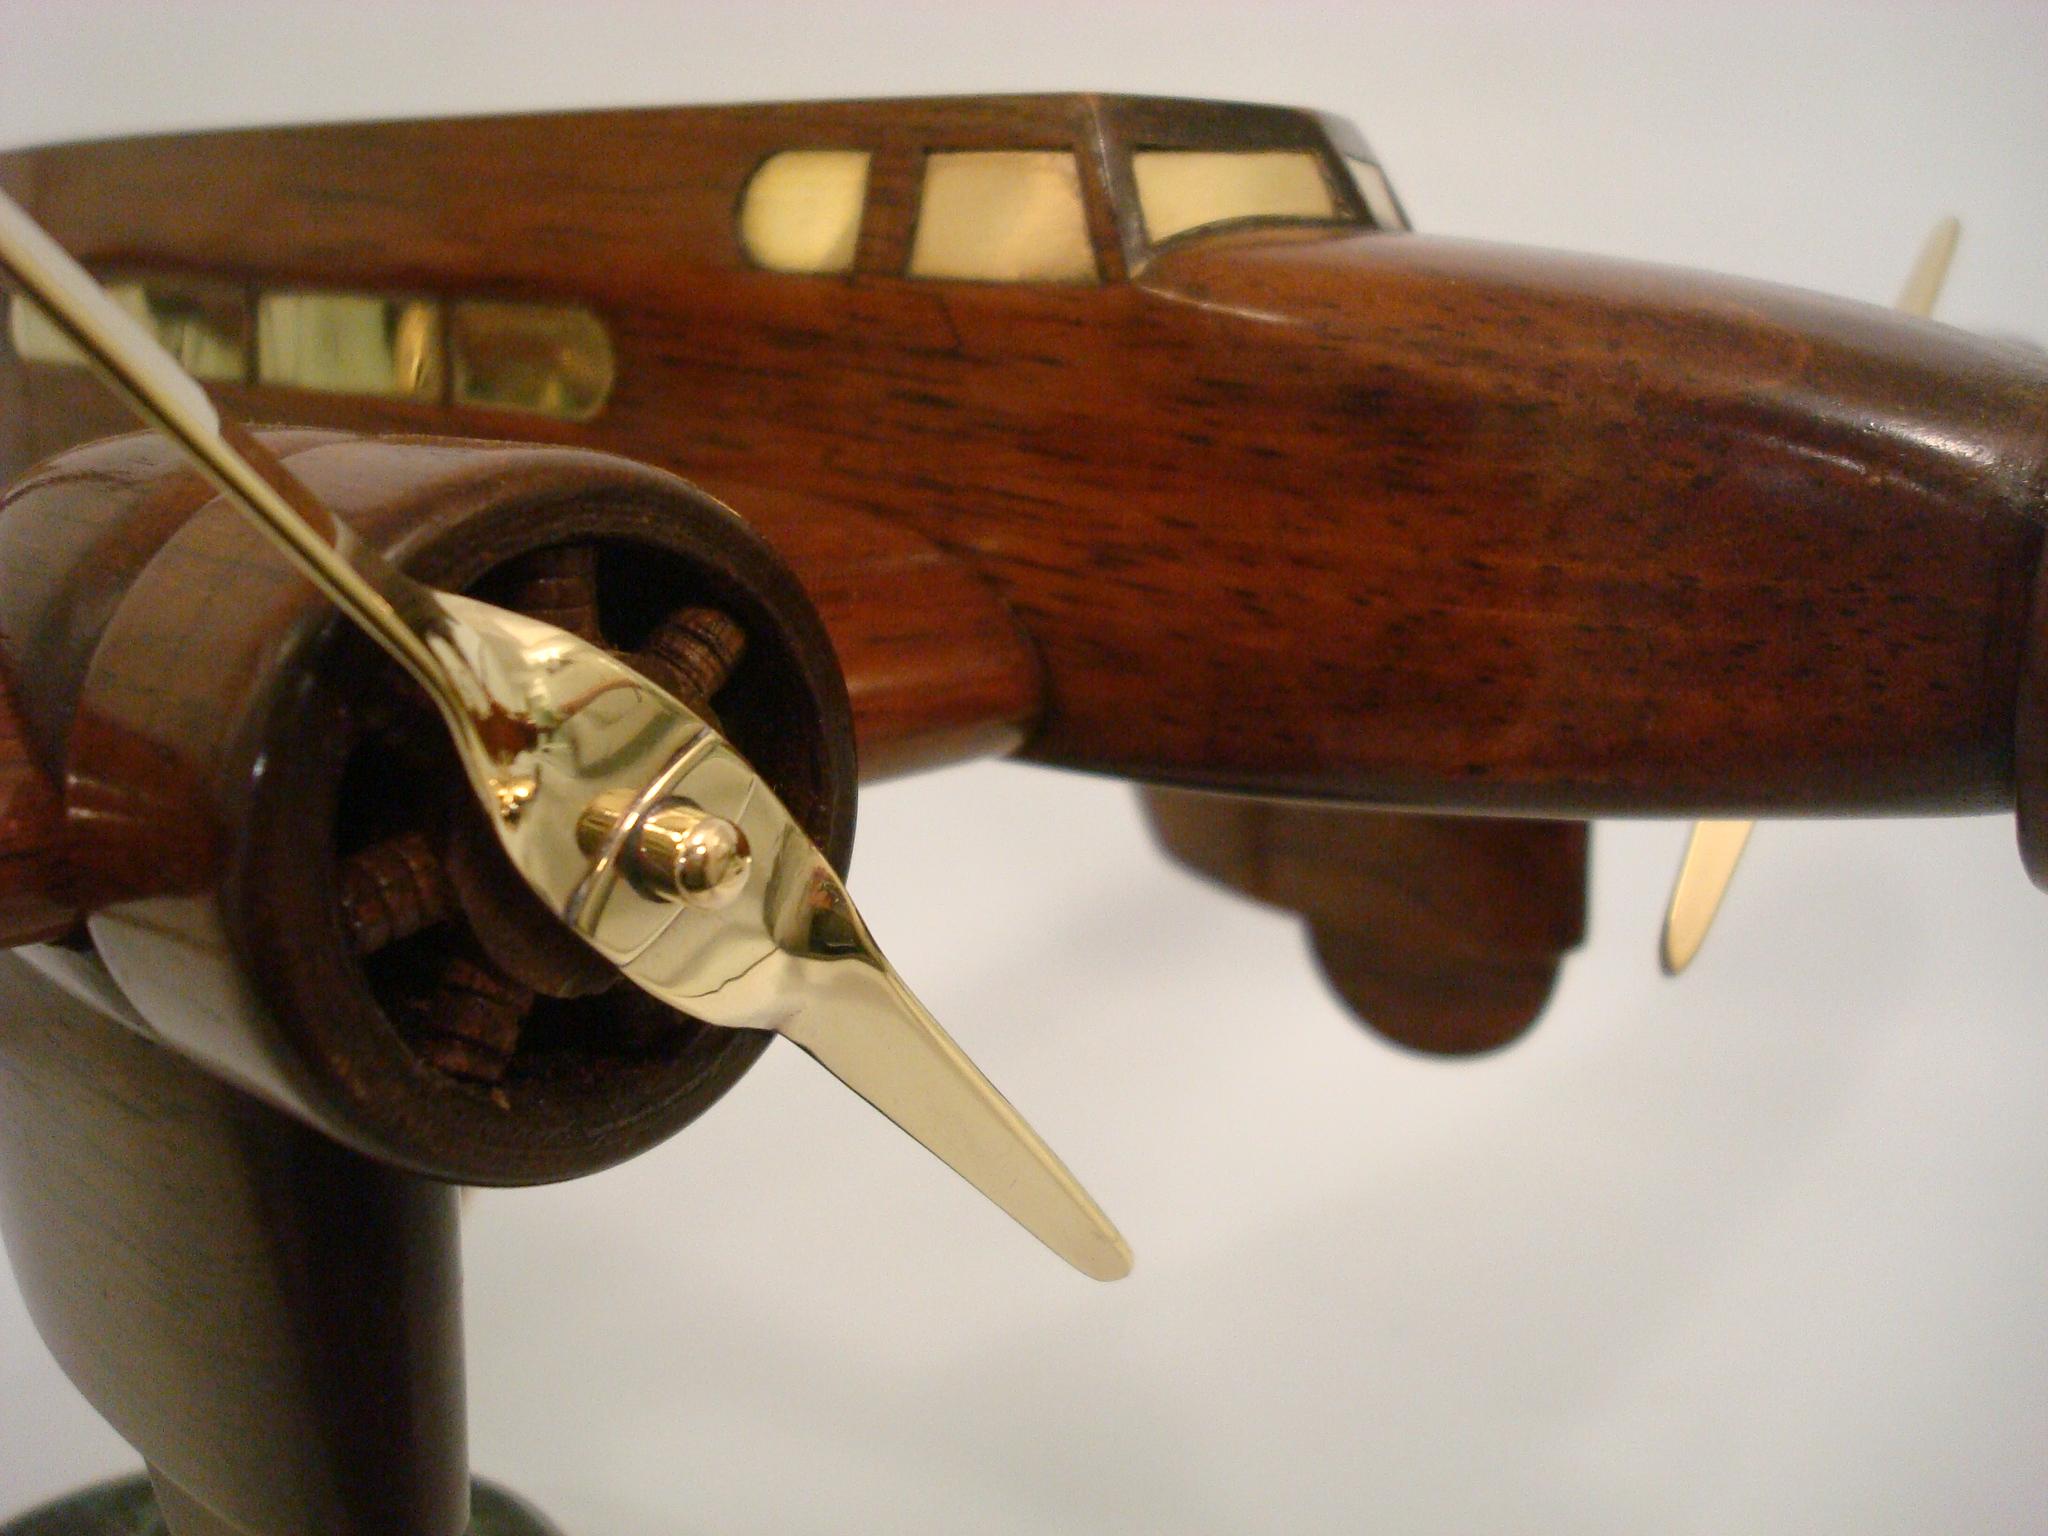 Polished Art Deco Dewoitine Wooden Counters Desk Model Airplane 1930s French For Sale